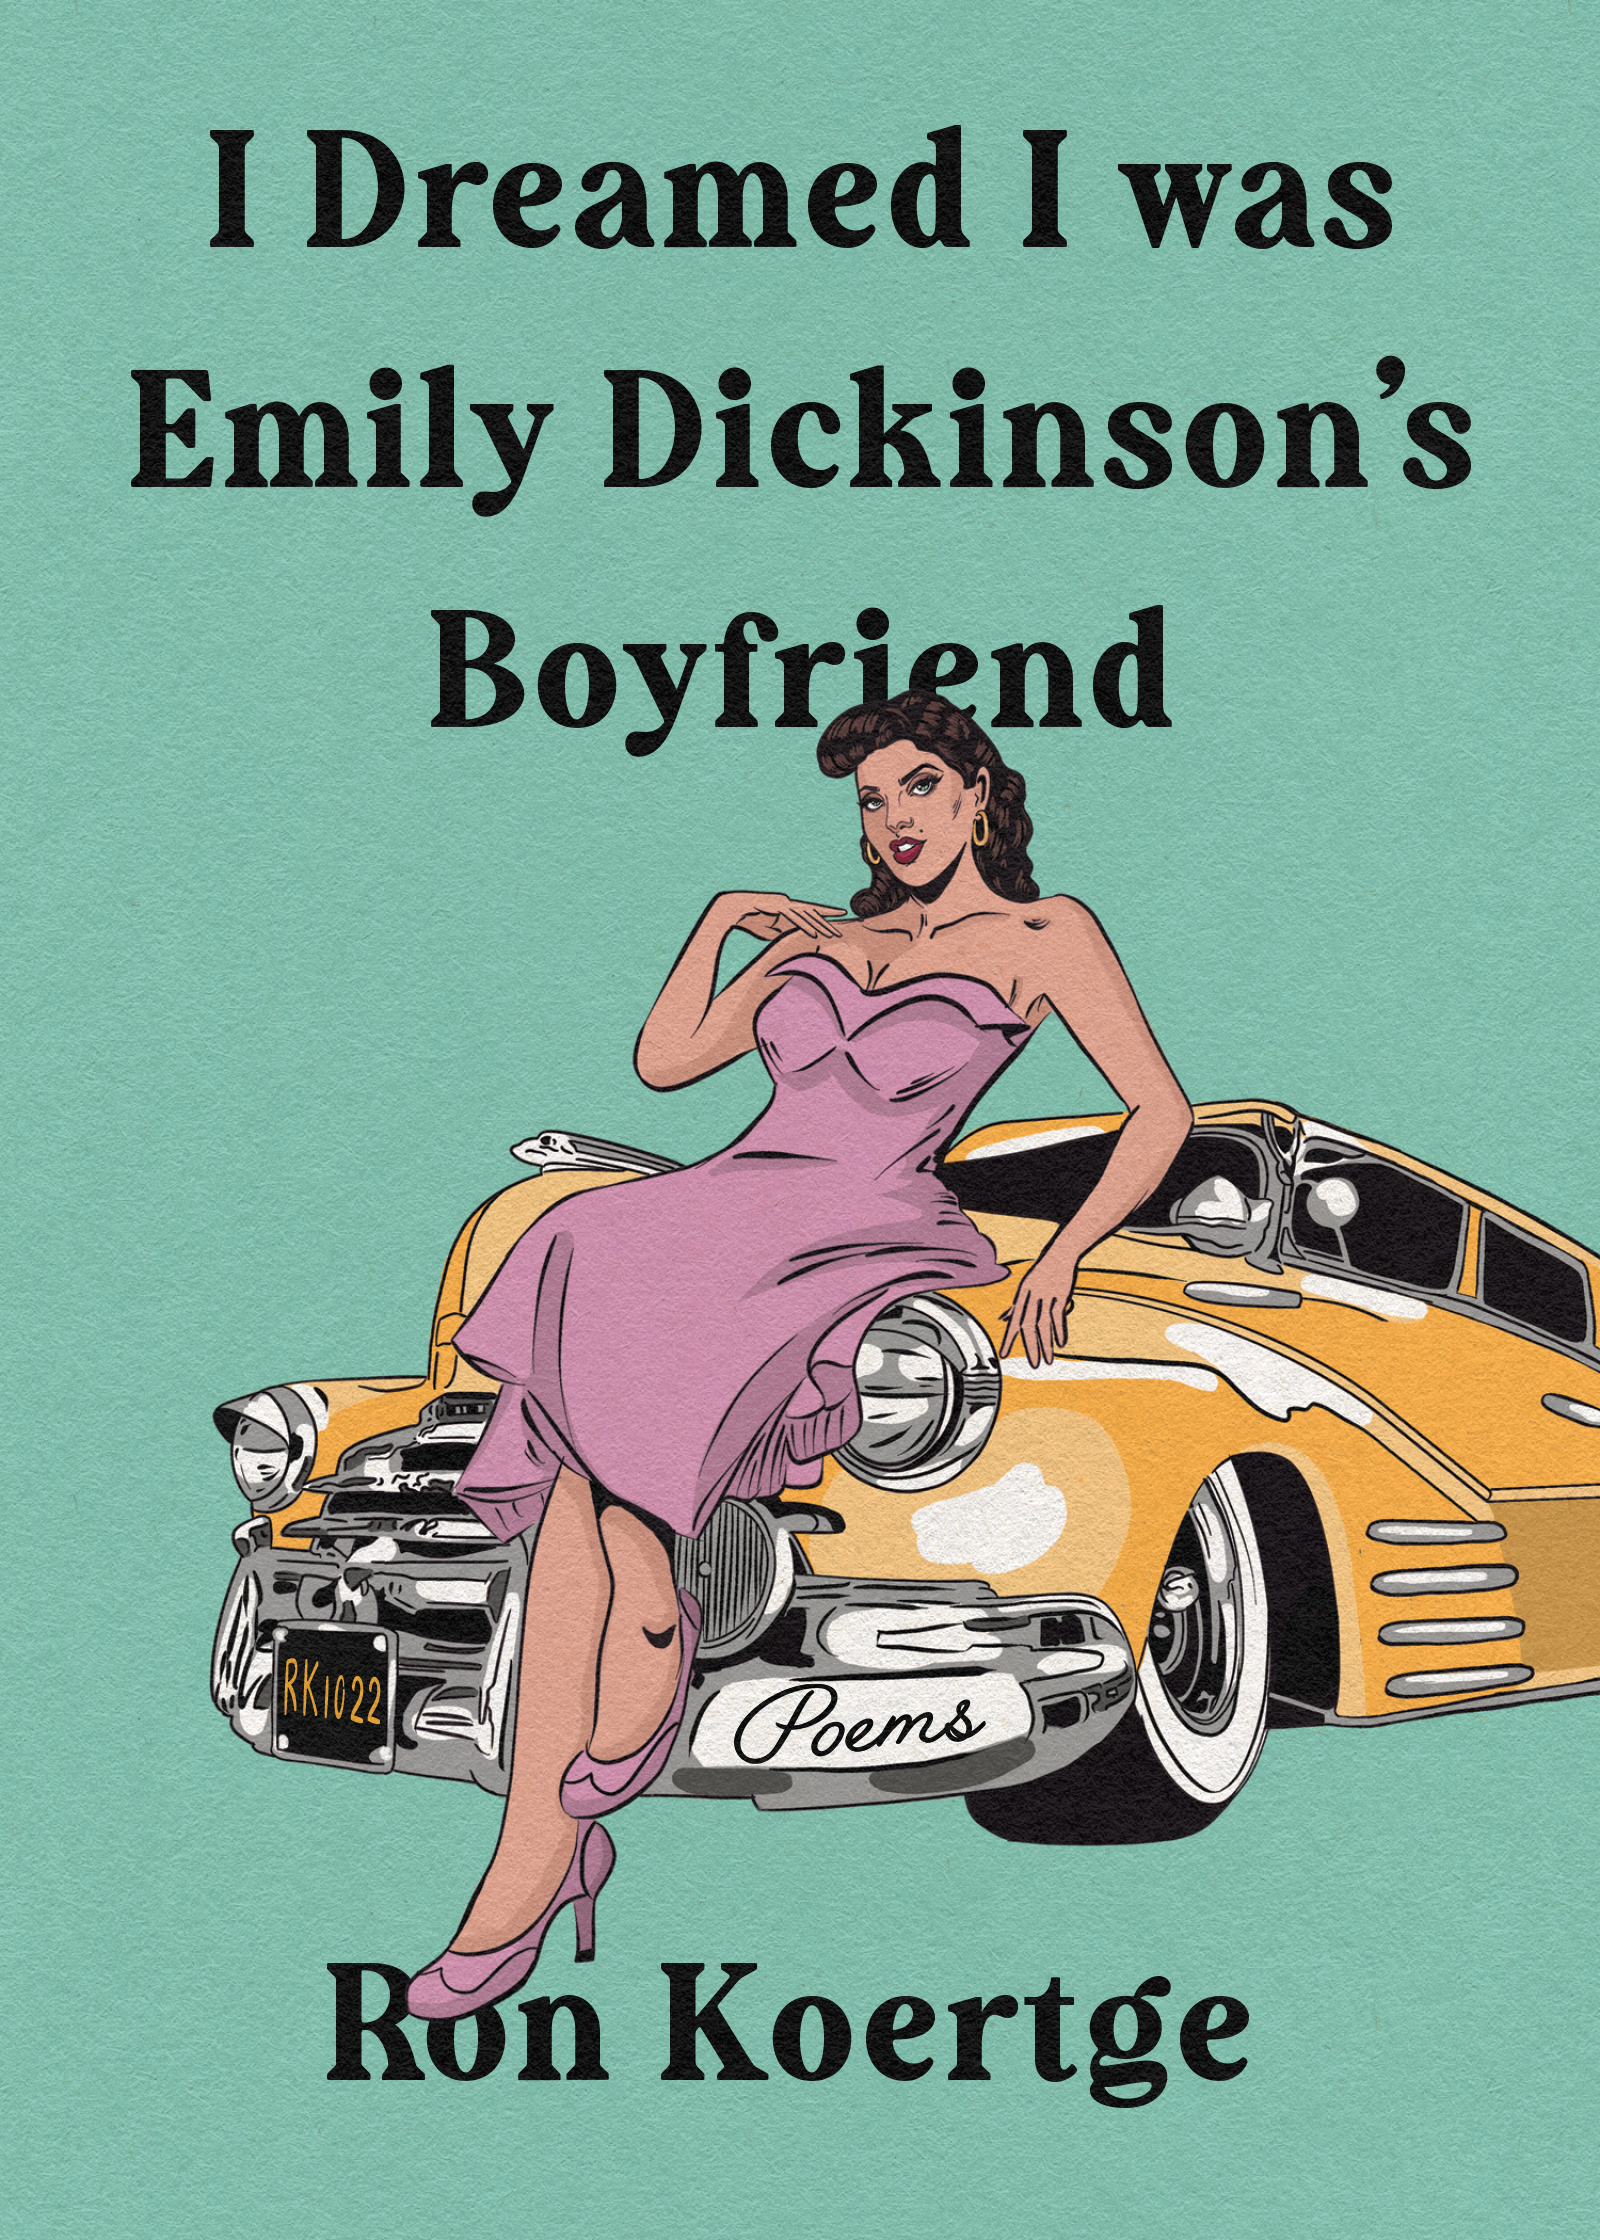 On a green cover, a cartoon of a beautiful girl in a strapless pink dress leans against a yellow car. Above the image is the title, "I Dreamed I was Emily Dickinson's Boyfriend." Below the woman's heeled shoes is the author, "Ron Koertge."